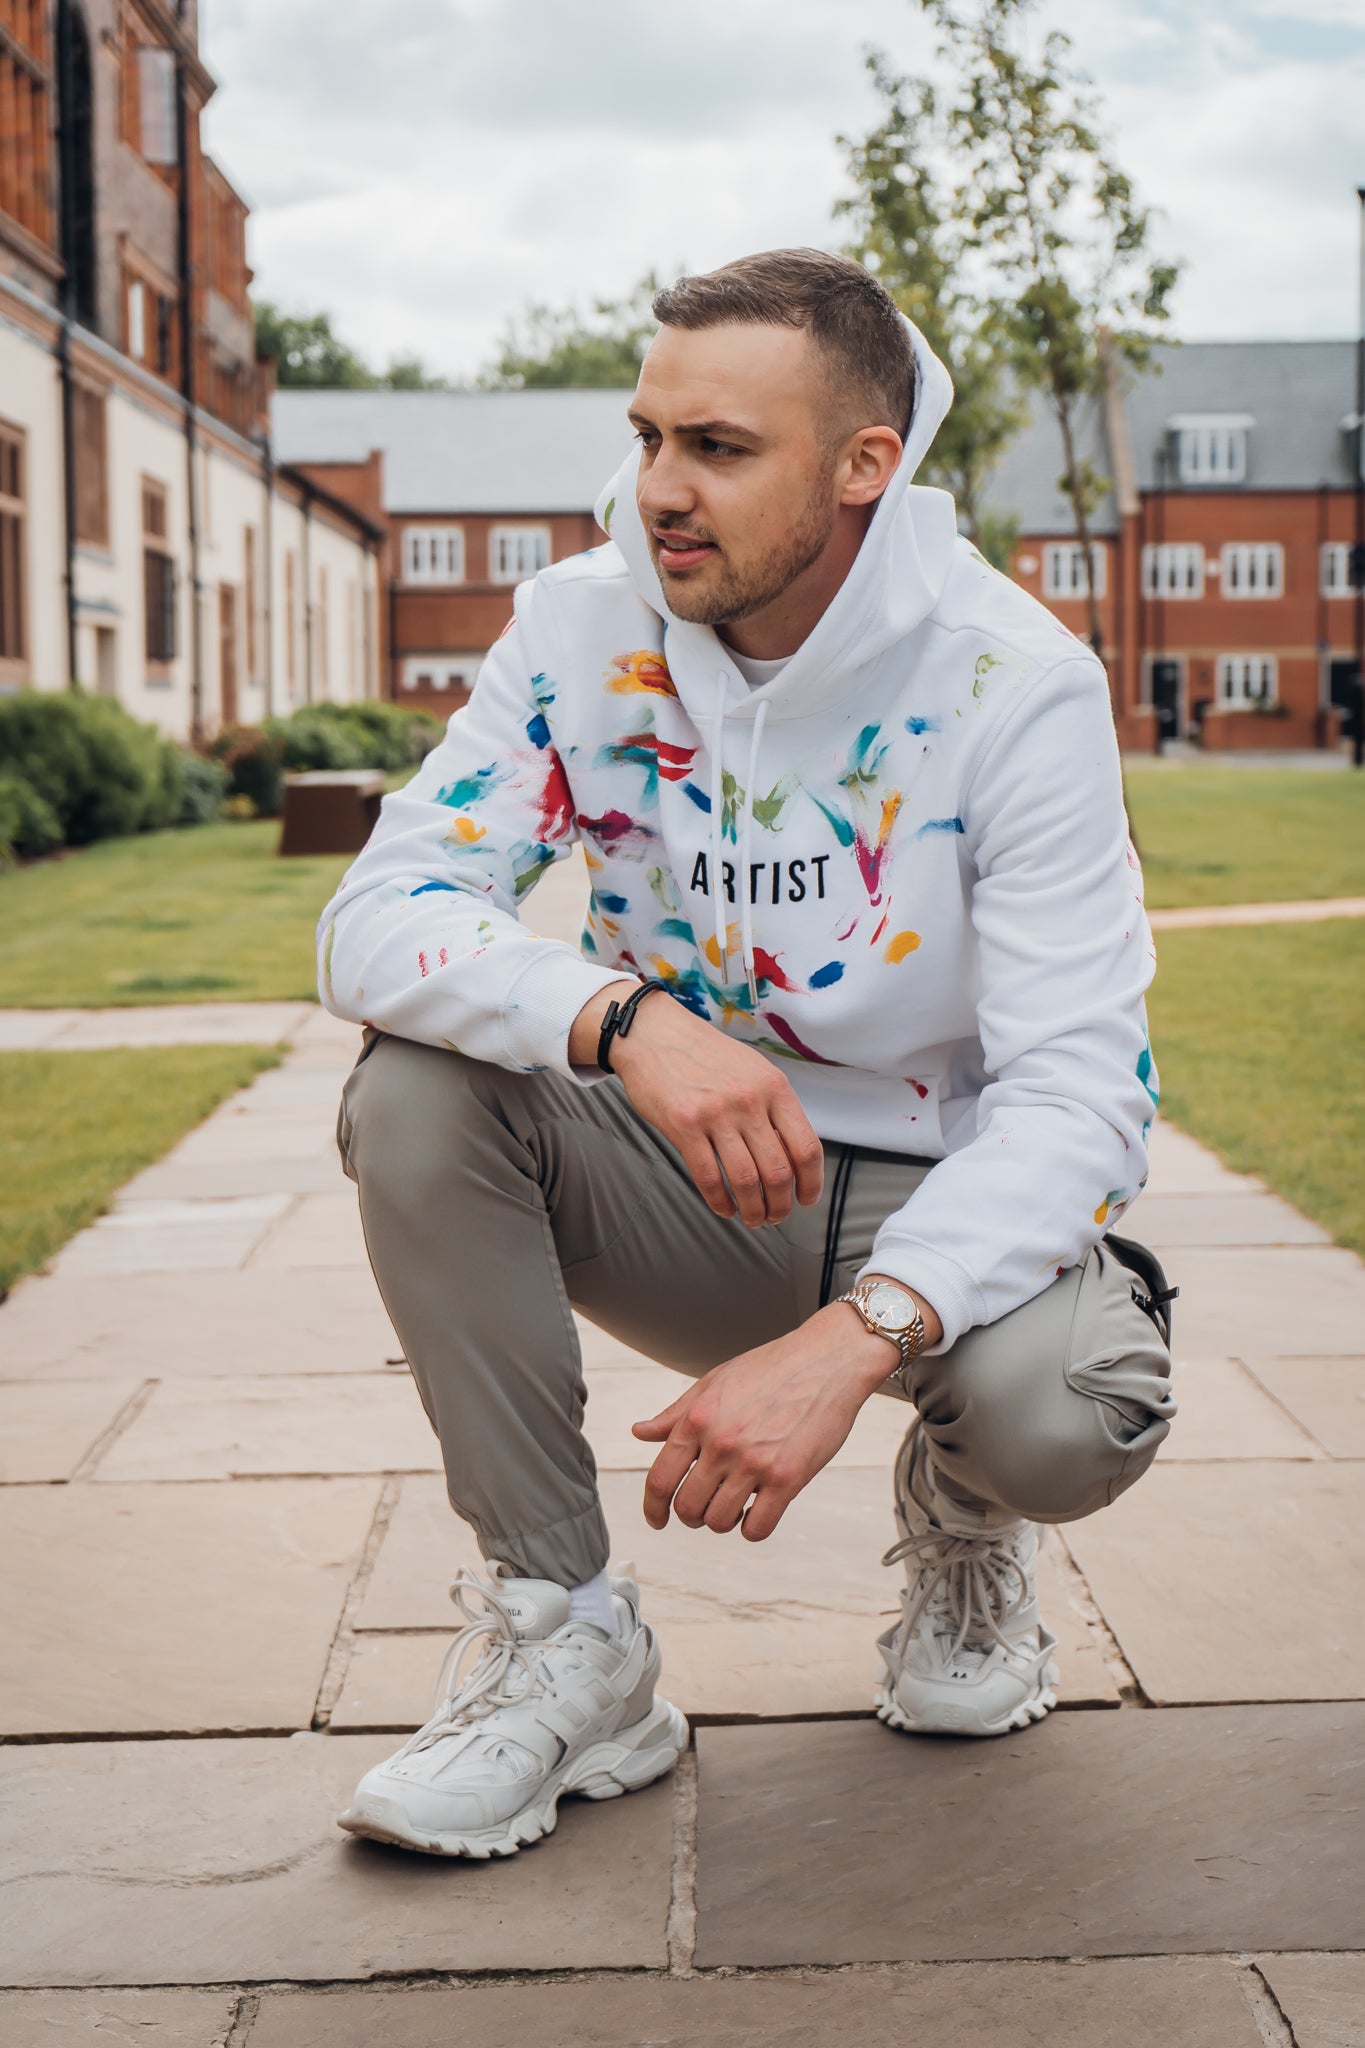 White Hoodie - Multi coloured hand-painted design